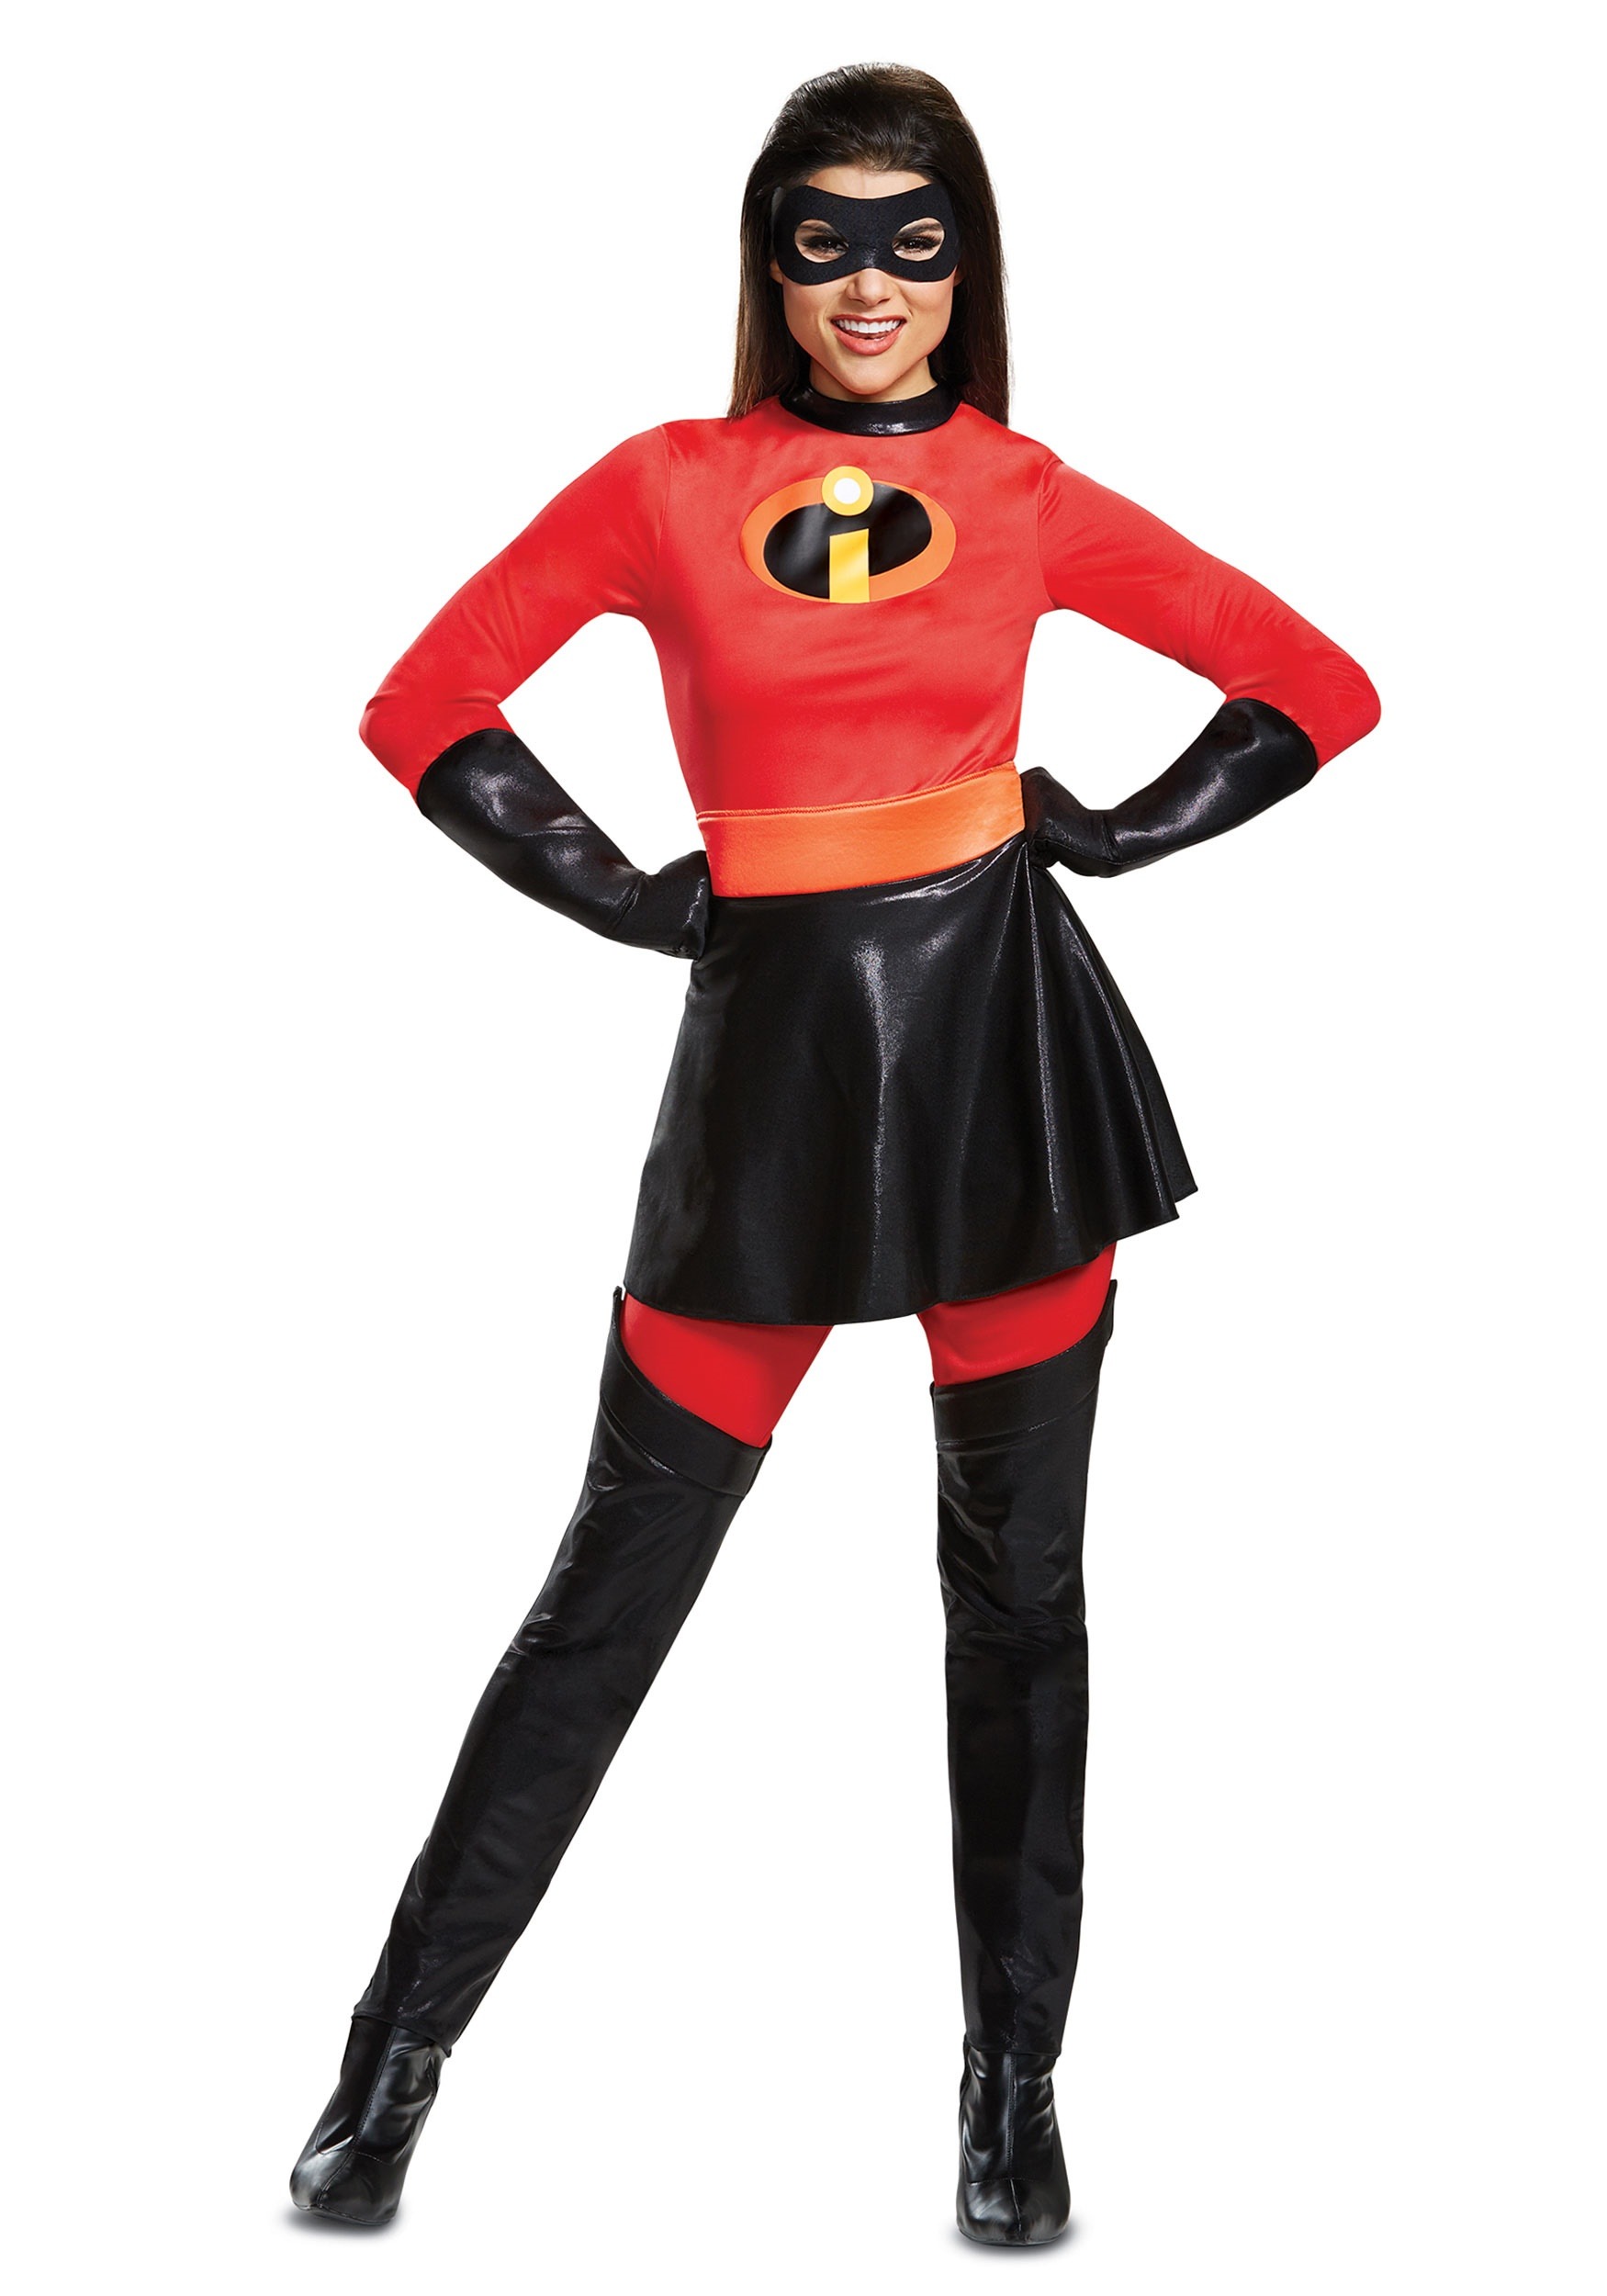 Photos - Fancy Dress Disney Disguise Incredibles 2 Deluxe Mrs. Incredible Costume for Adults Black/ 